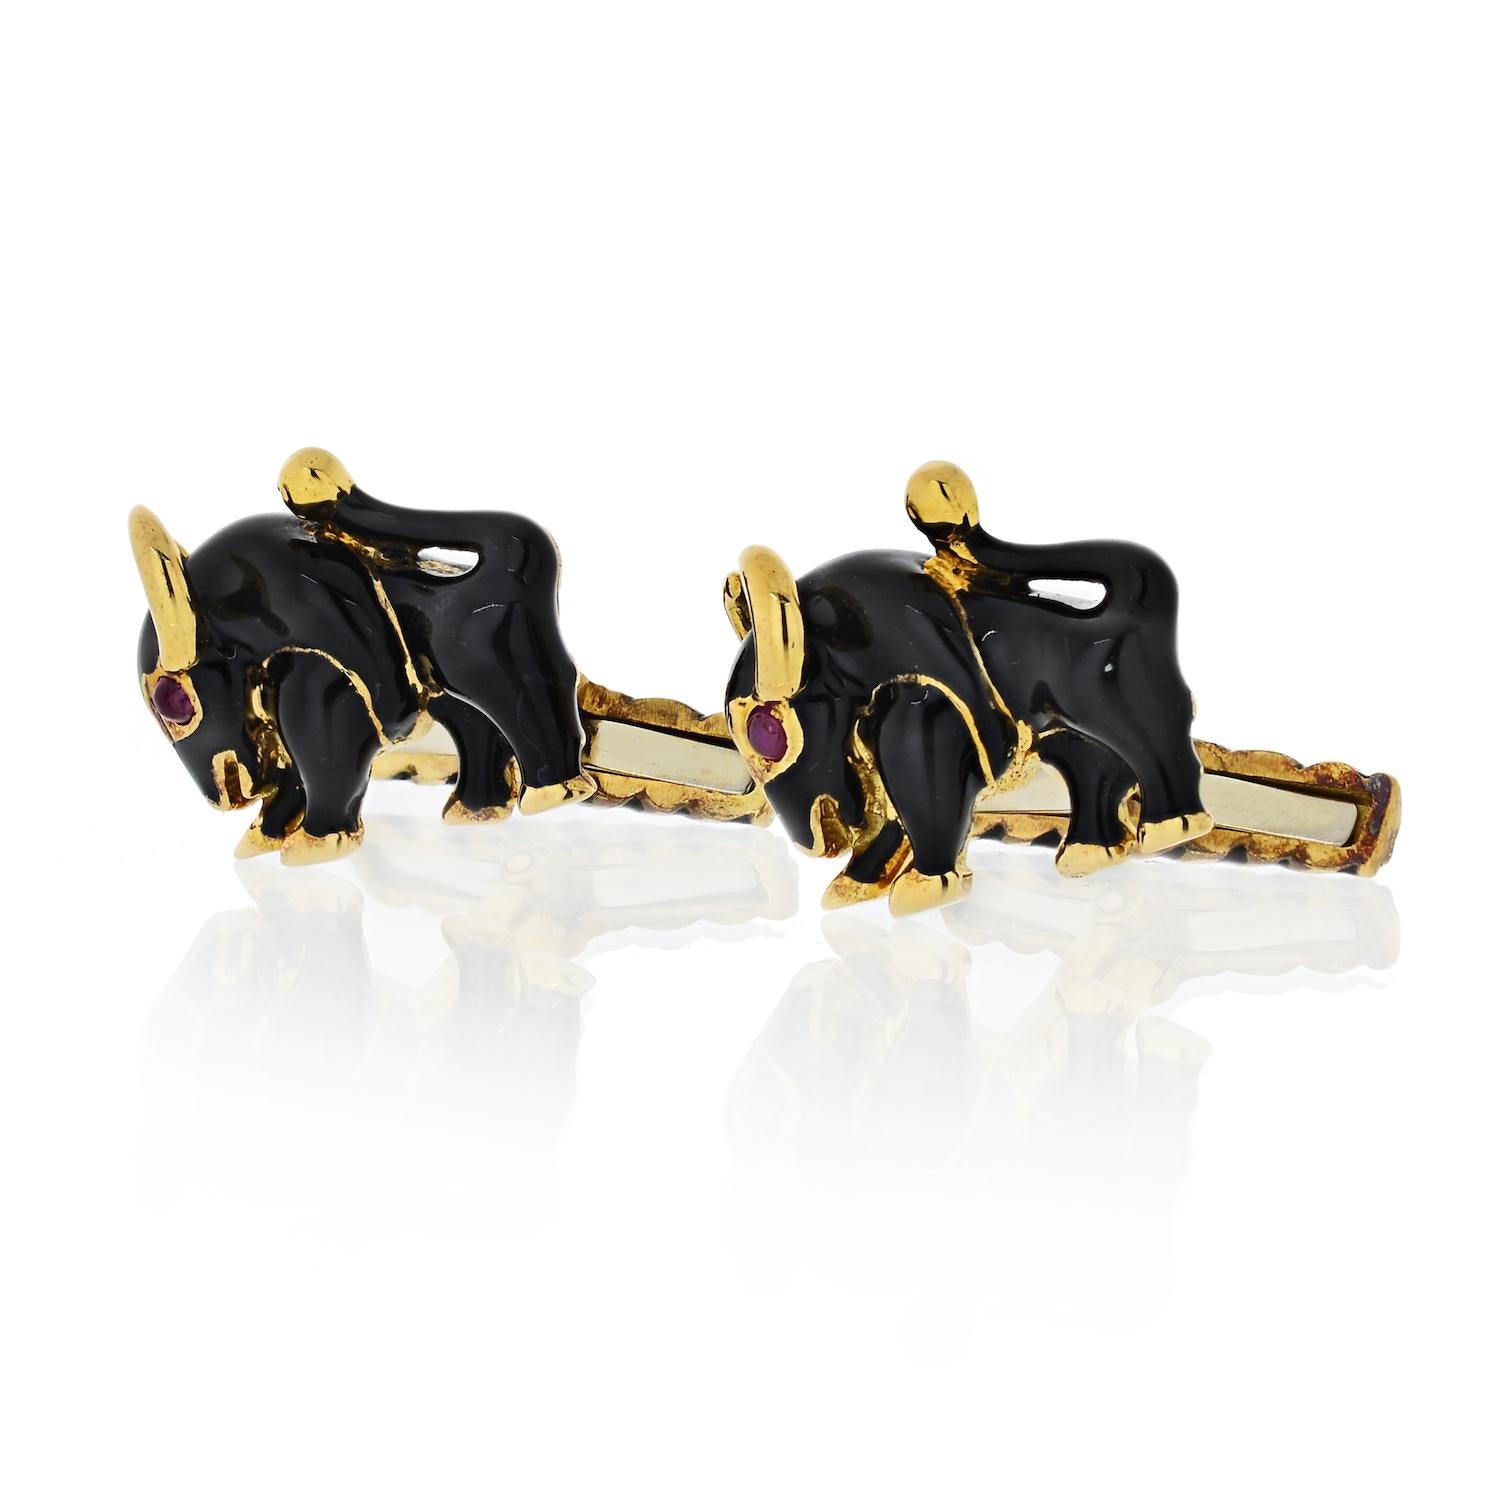 18K Yellow Gold Cuff links made and signed by David Webb. They are vintage from an estate in mint condition having been stored in their original box. They are figural Bulls finished in gleaming dark Cobalt Blue enamel with Cabochon Ruby Eyes. Gold